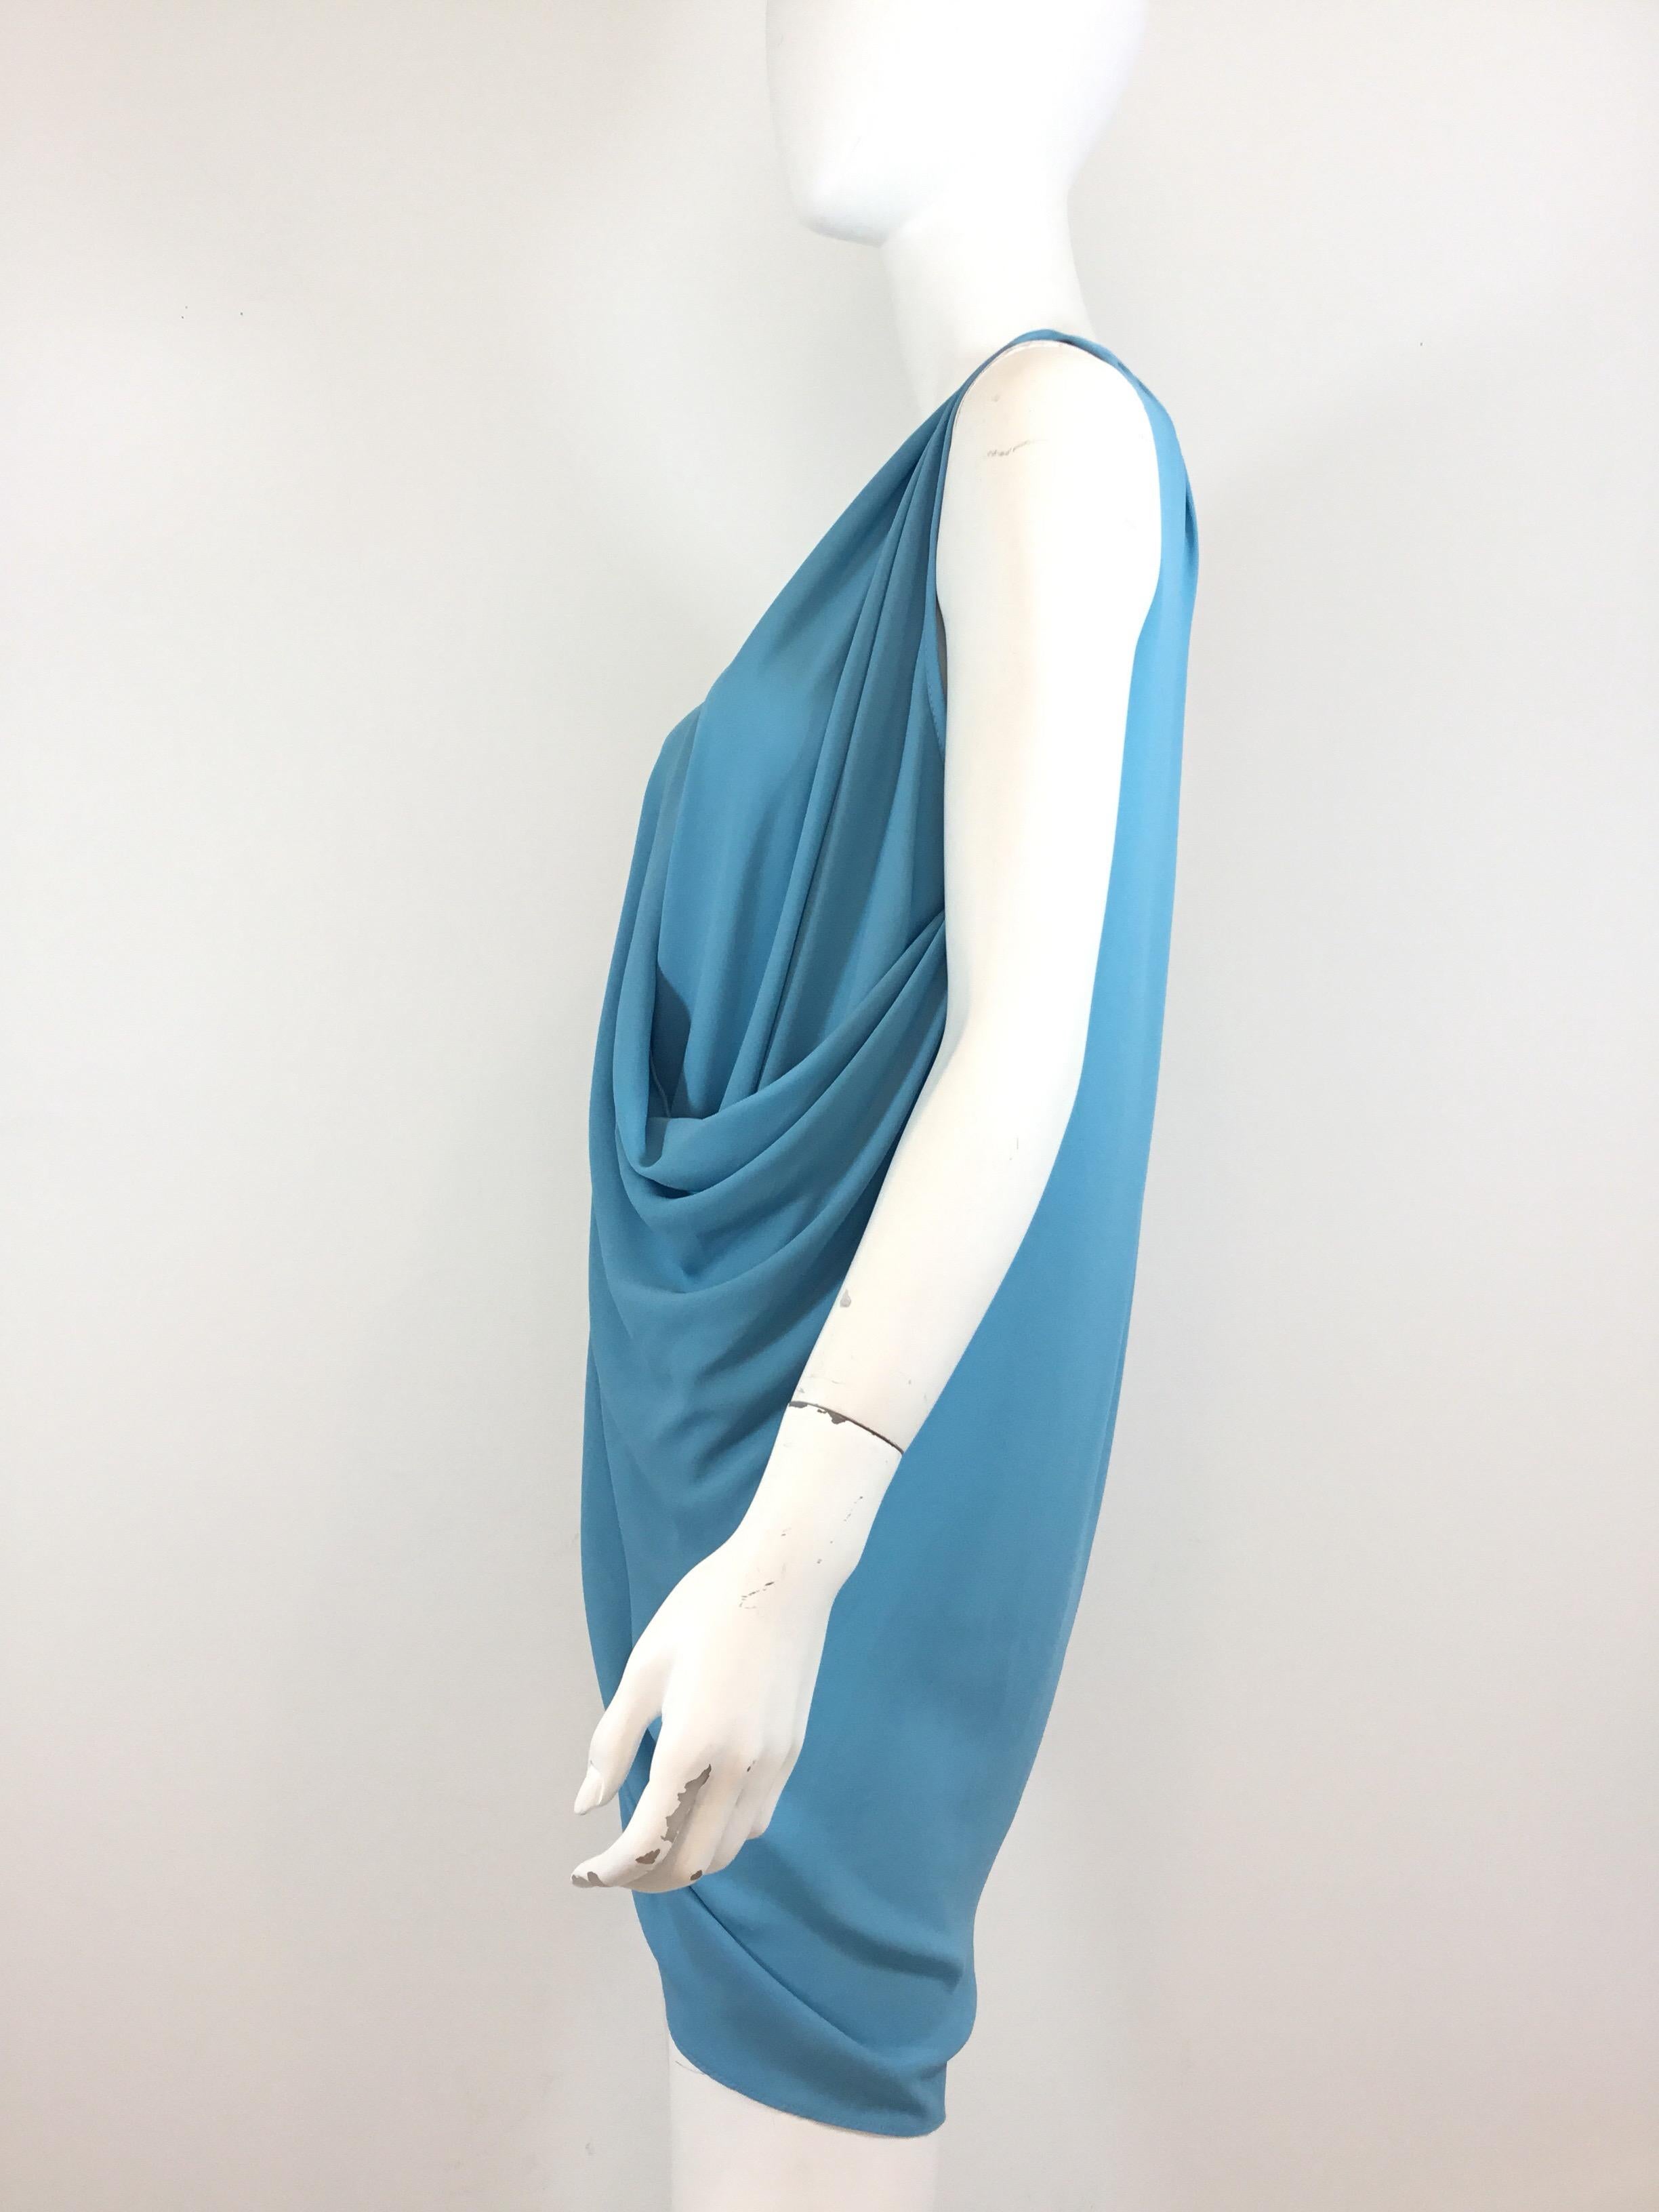 Gianni Versace vintage mini dress/tunic featured in an soft blue with a draped/cowl neckline, and is labeled size 44. Made in Italy. Dress is composed of a viscose-rayon and polyester blend. 

Measurements:
bust 40'', length 34'', waist measures